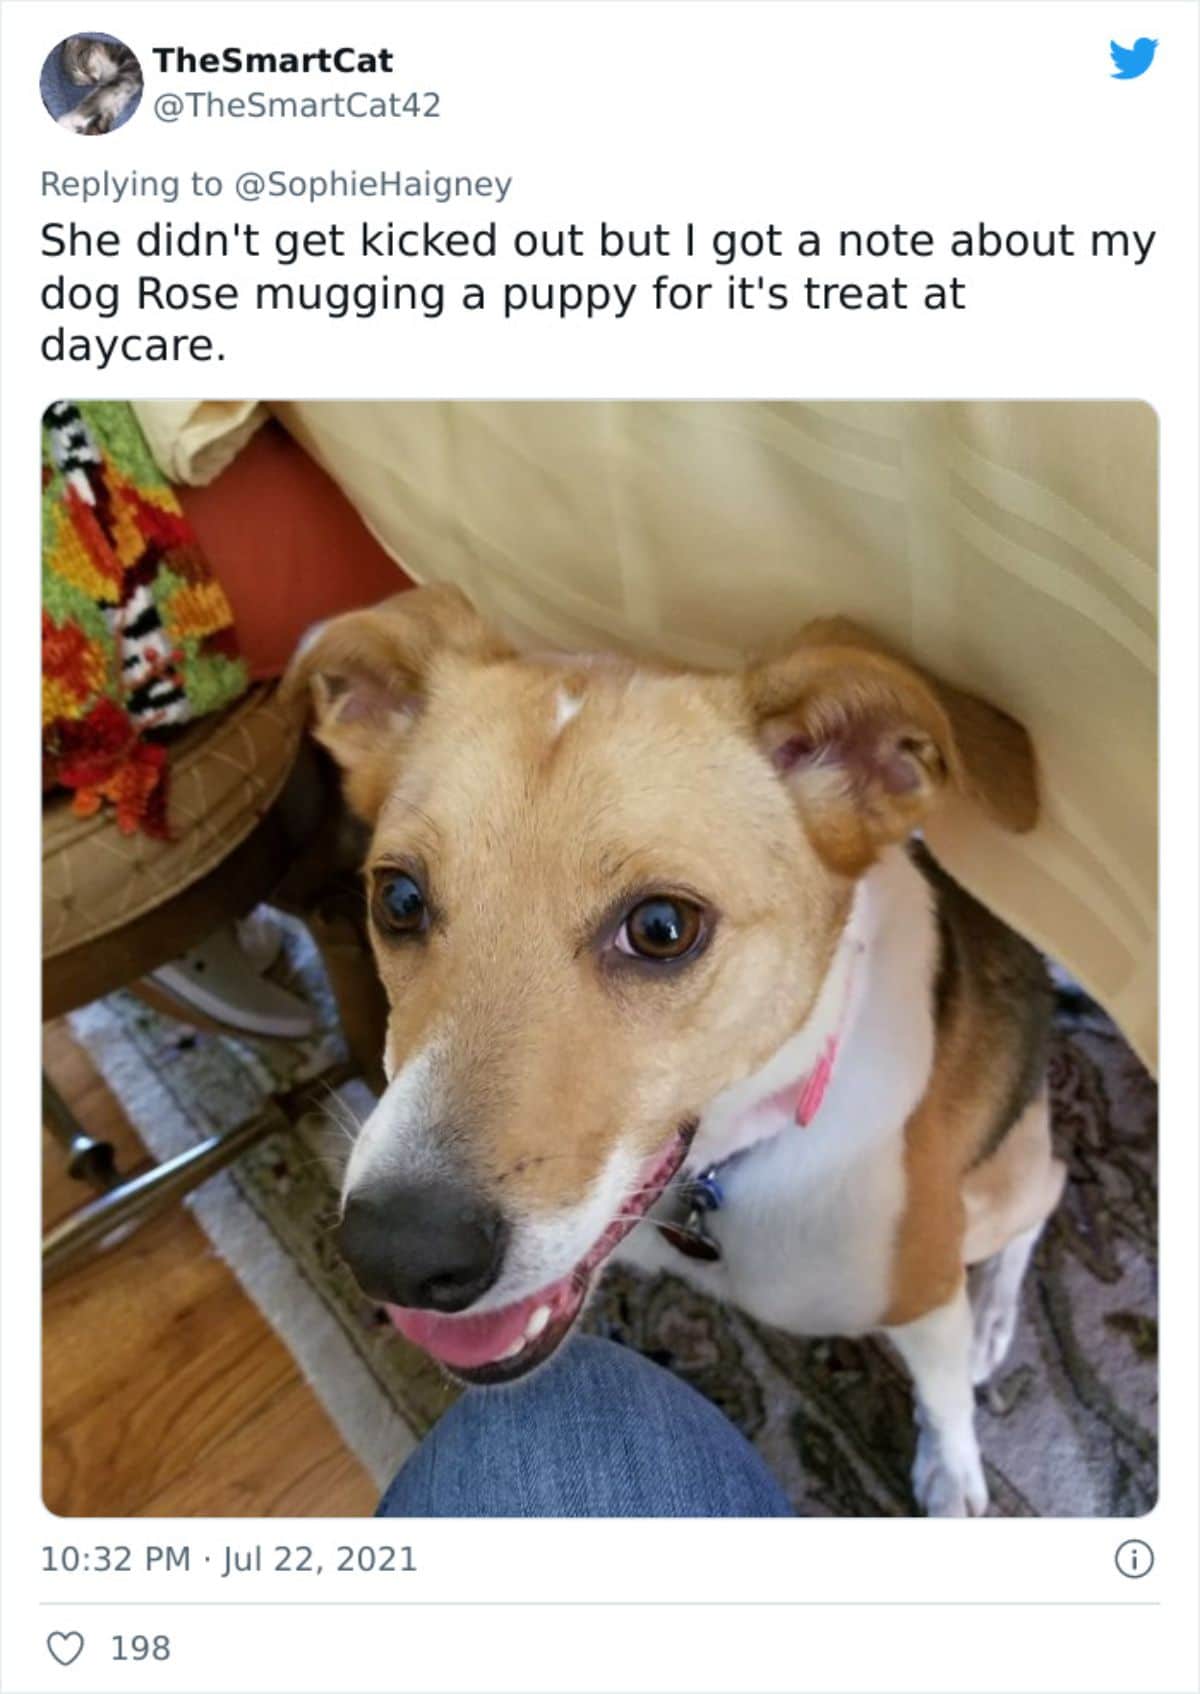 a tweet with a photo of a brown and white dog saying she got in trouble for mugging a puppy for its treat